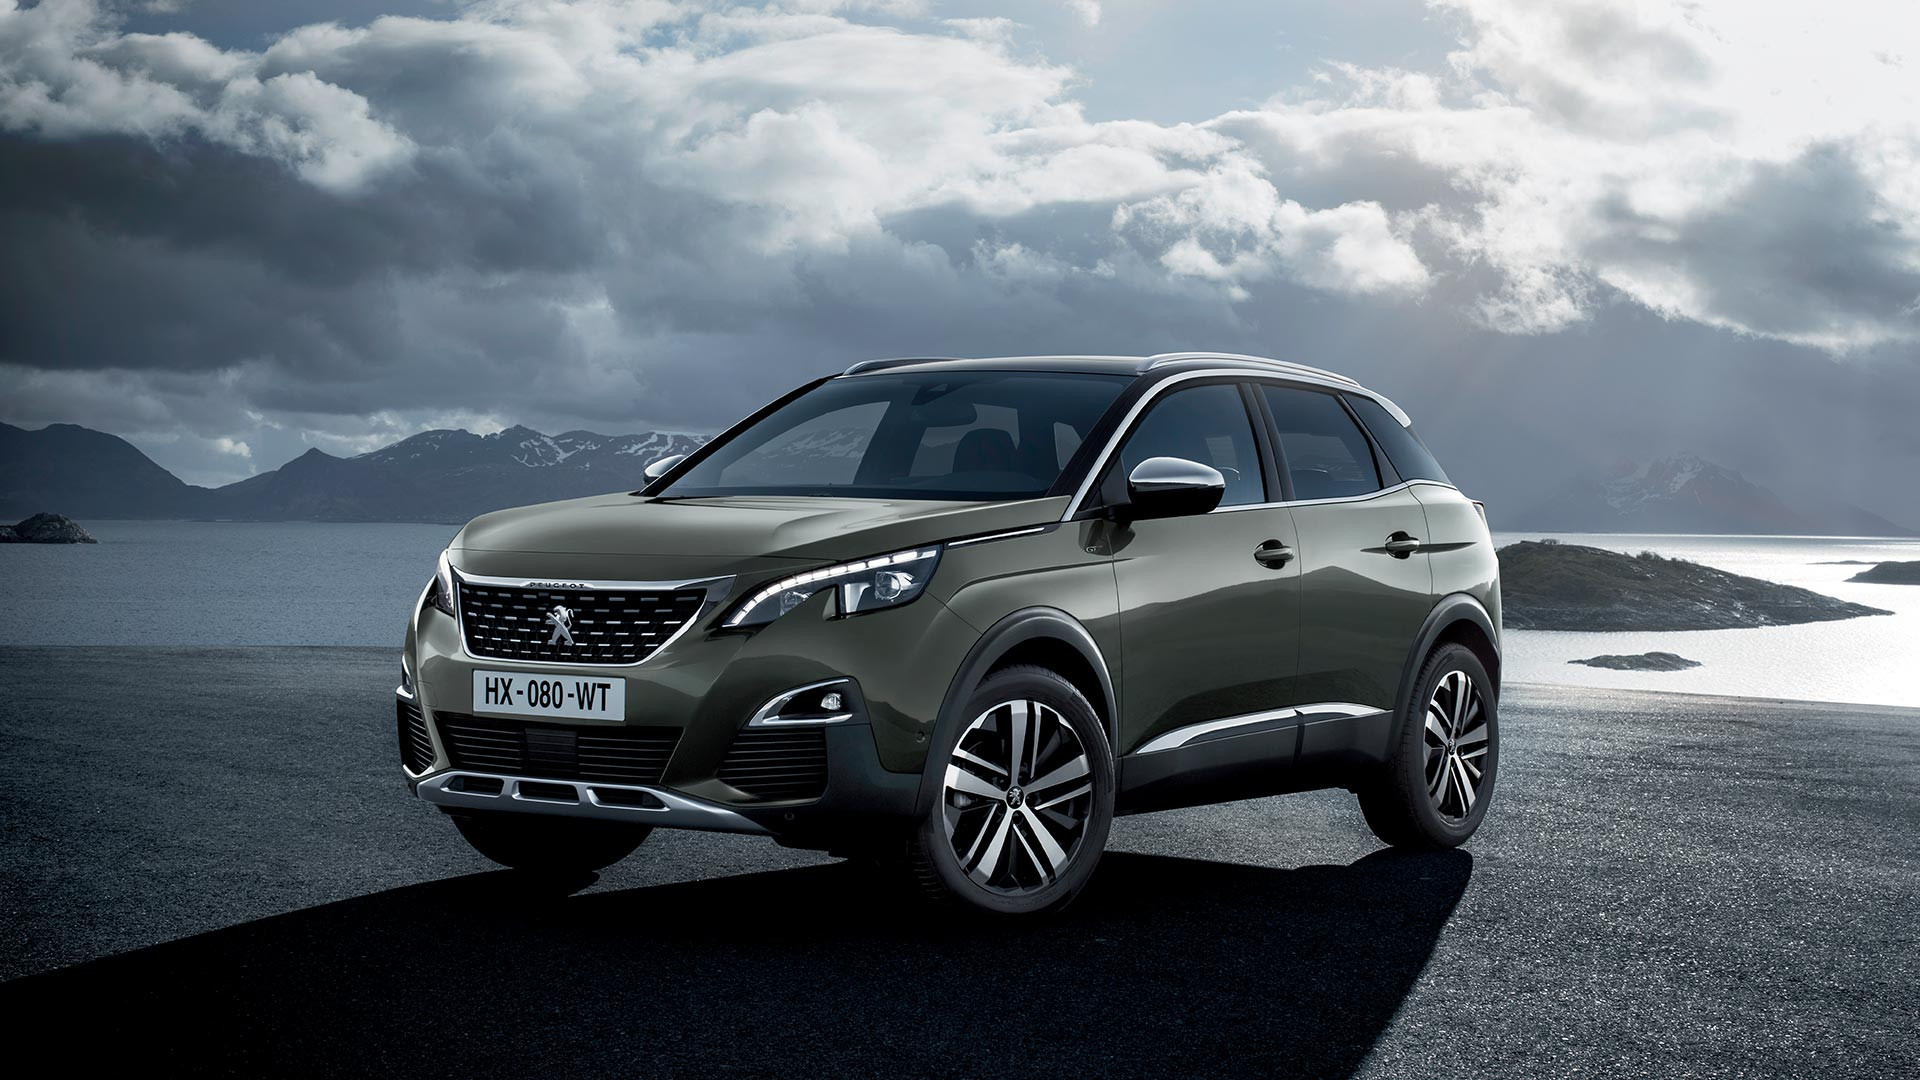 High Quality Tuning Files Peugeot 3008 2.0 HDI Hybrid4 200hp